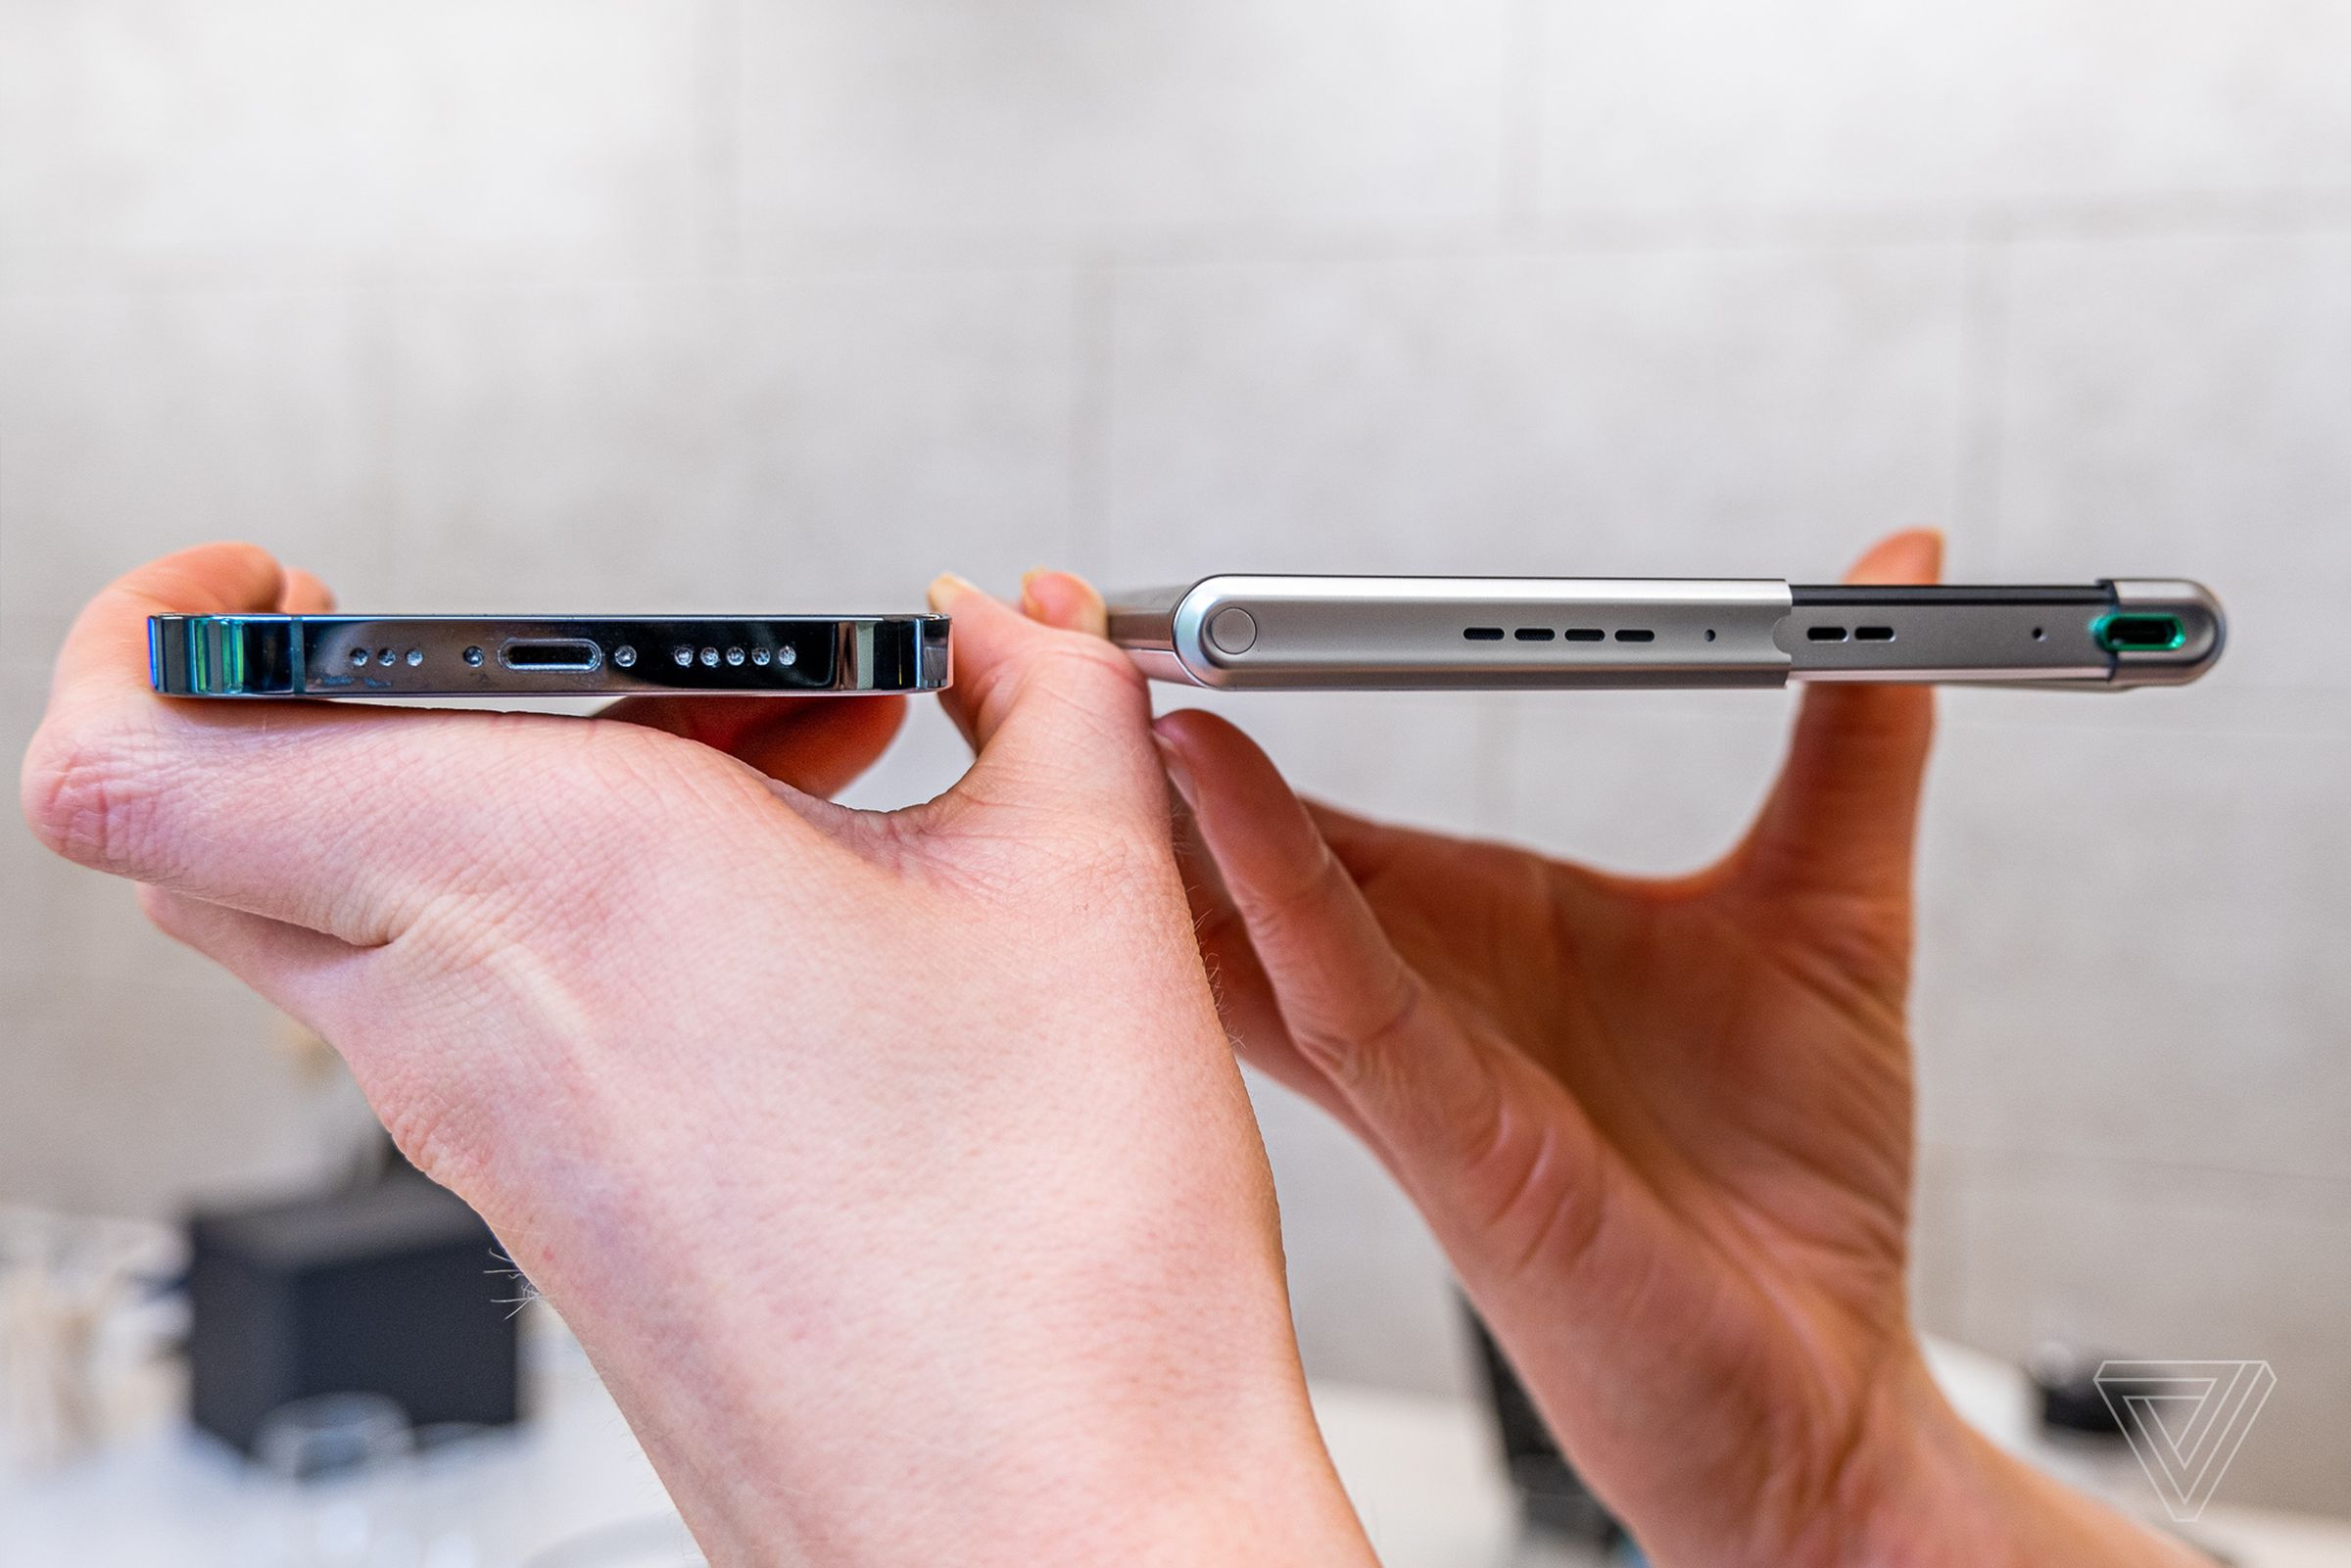 The Oppo X 2021 (right) vs an iPhone 12 Pro (left).